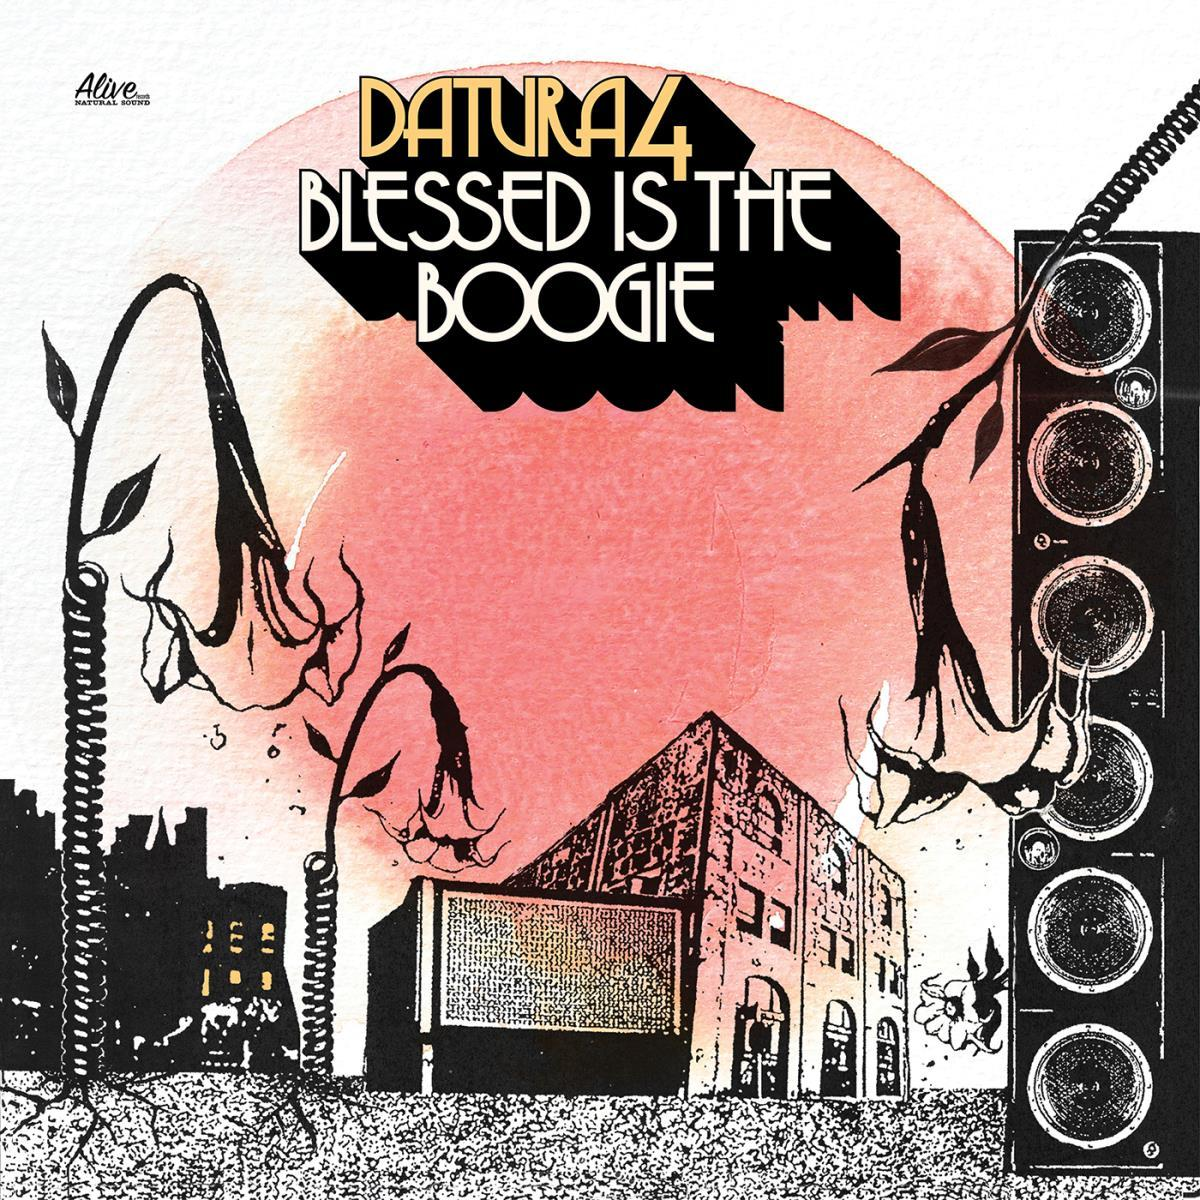 - - (Vinyl) The Is Datura4 Blessed Boogie